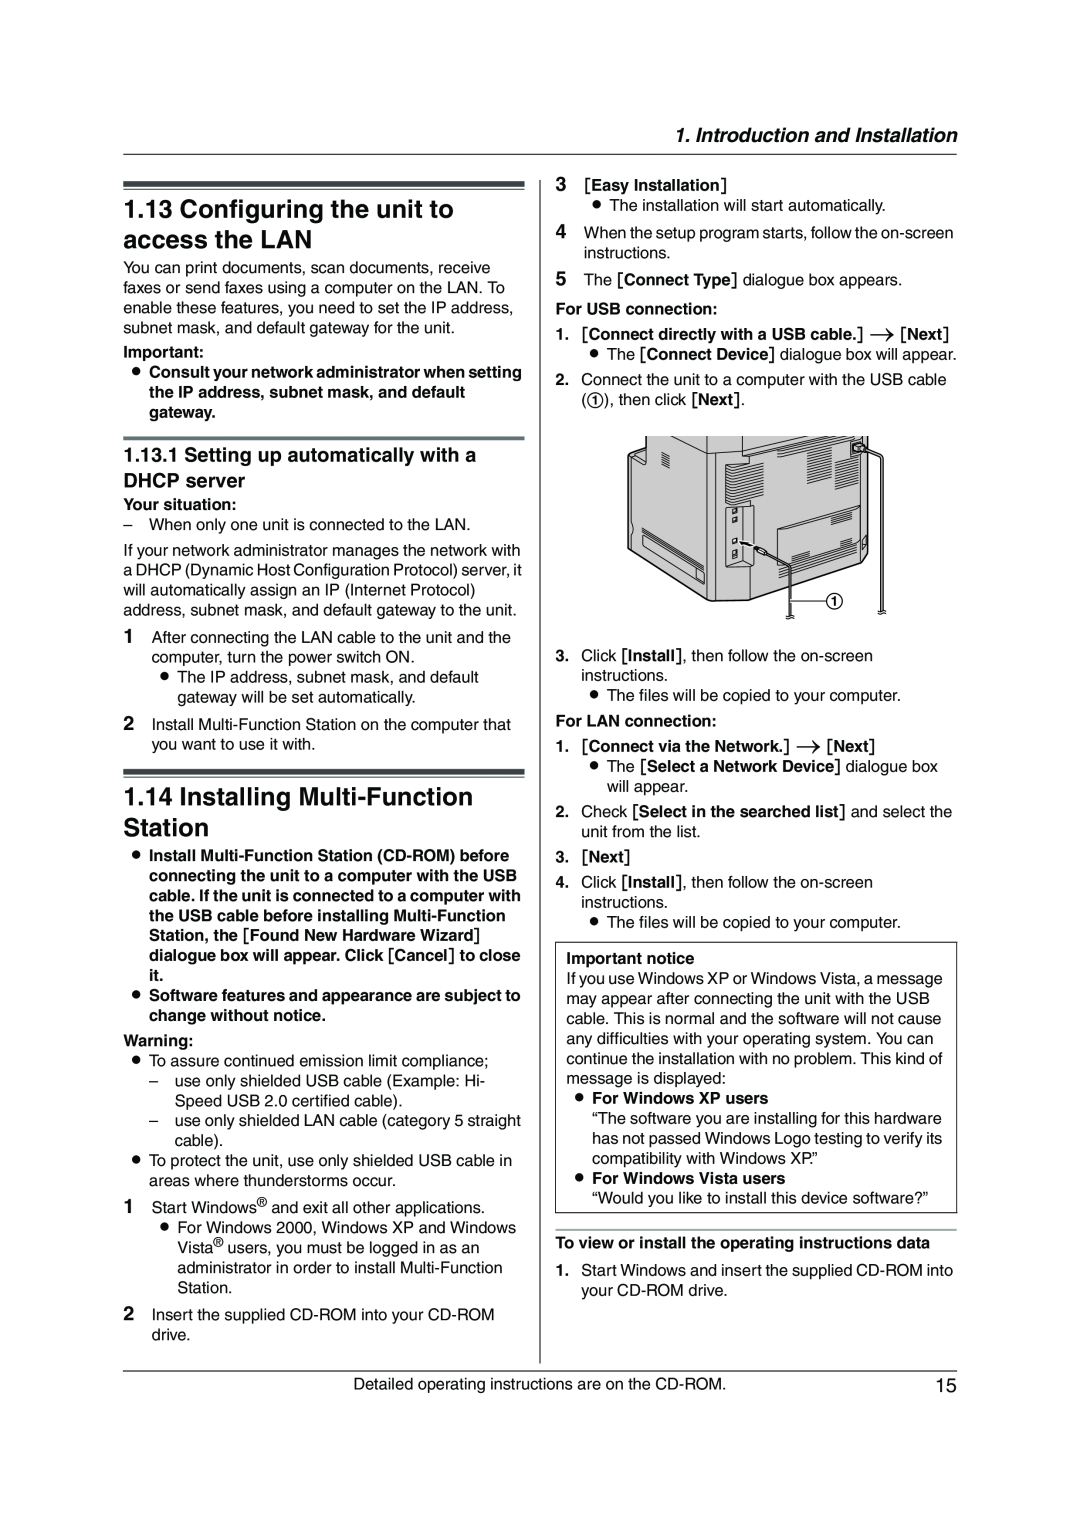 Panasonic KX-MC6020CX operating instructions Configuring the unit to access the LAN, Installing Multi-Function Station 